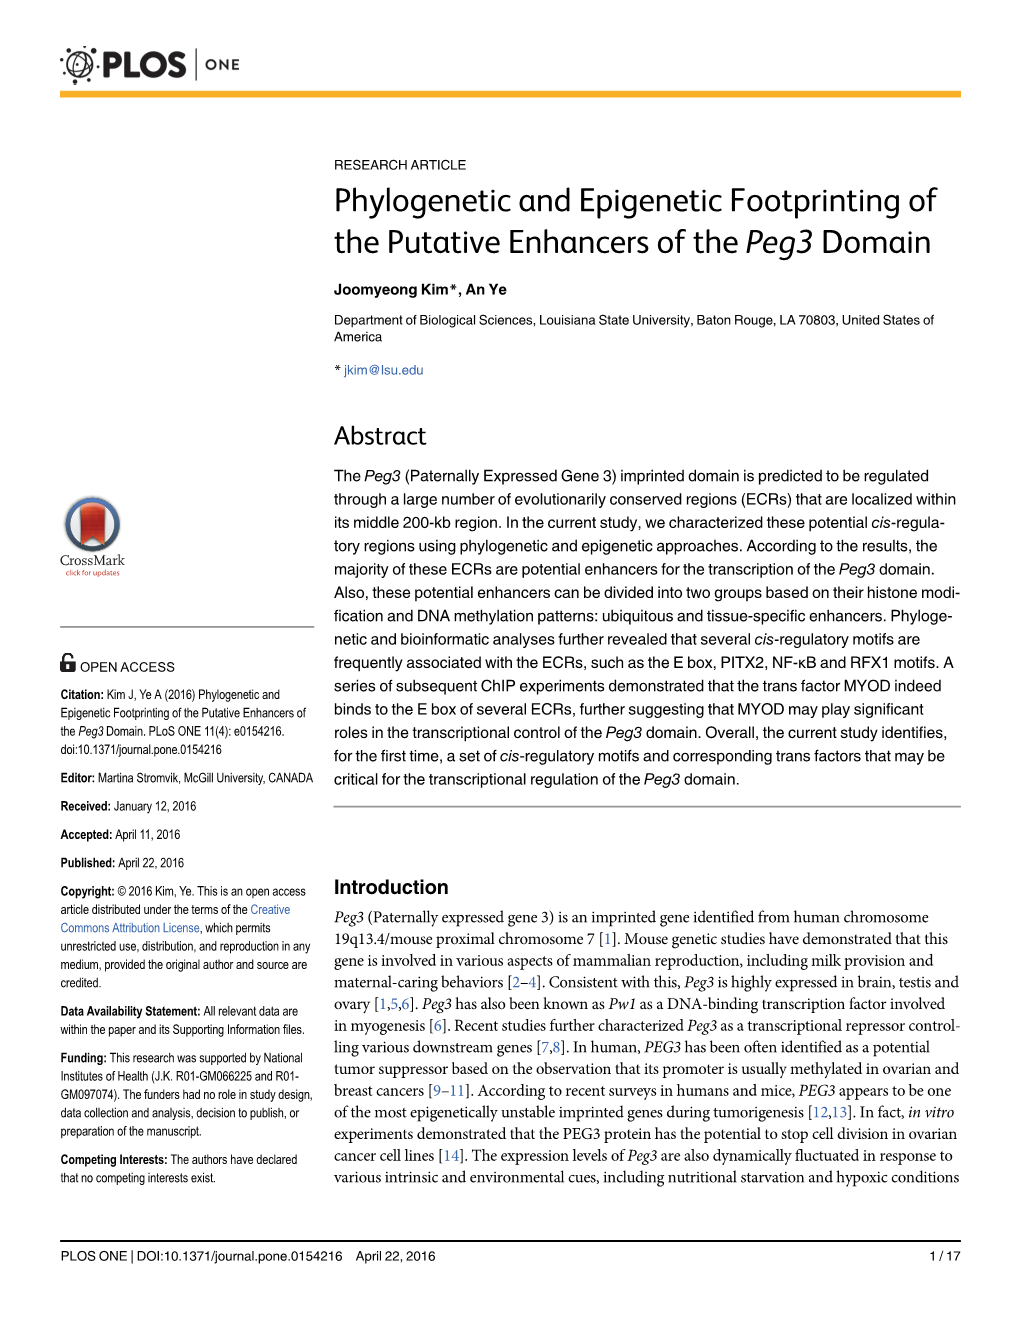 Phylogenetic and Epigenetic Footprinting of the Putative Enhancers of the Peg3 Domain